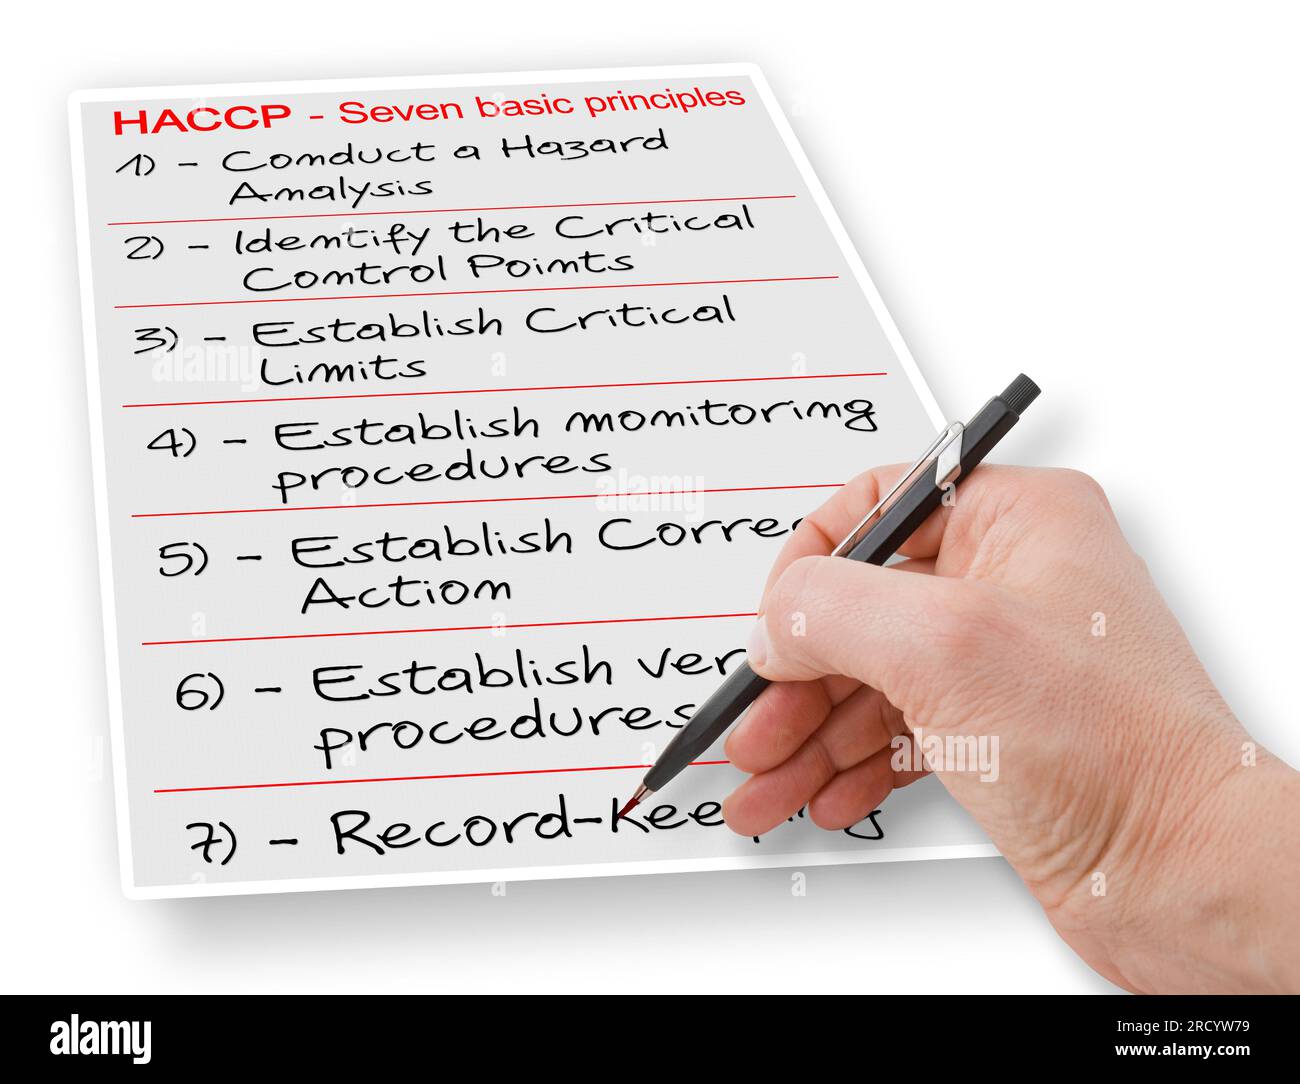 Seven basic principles about HACCP plans (Hazard Analysis and Critical Control Points) - Food Safety and Quality Control in food industry concept imag Stock Photo